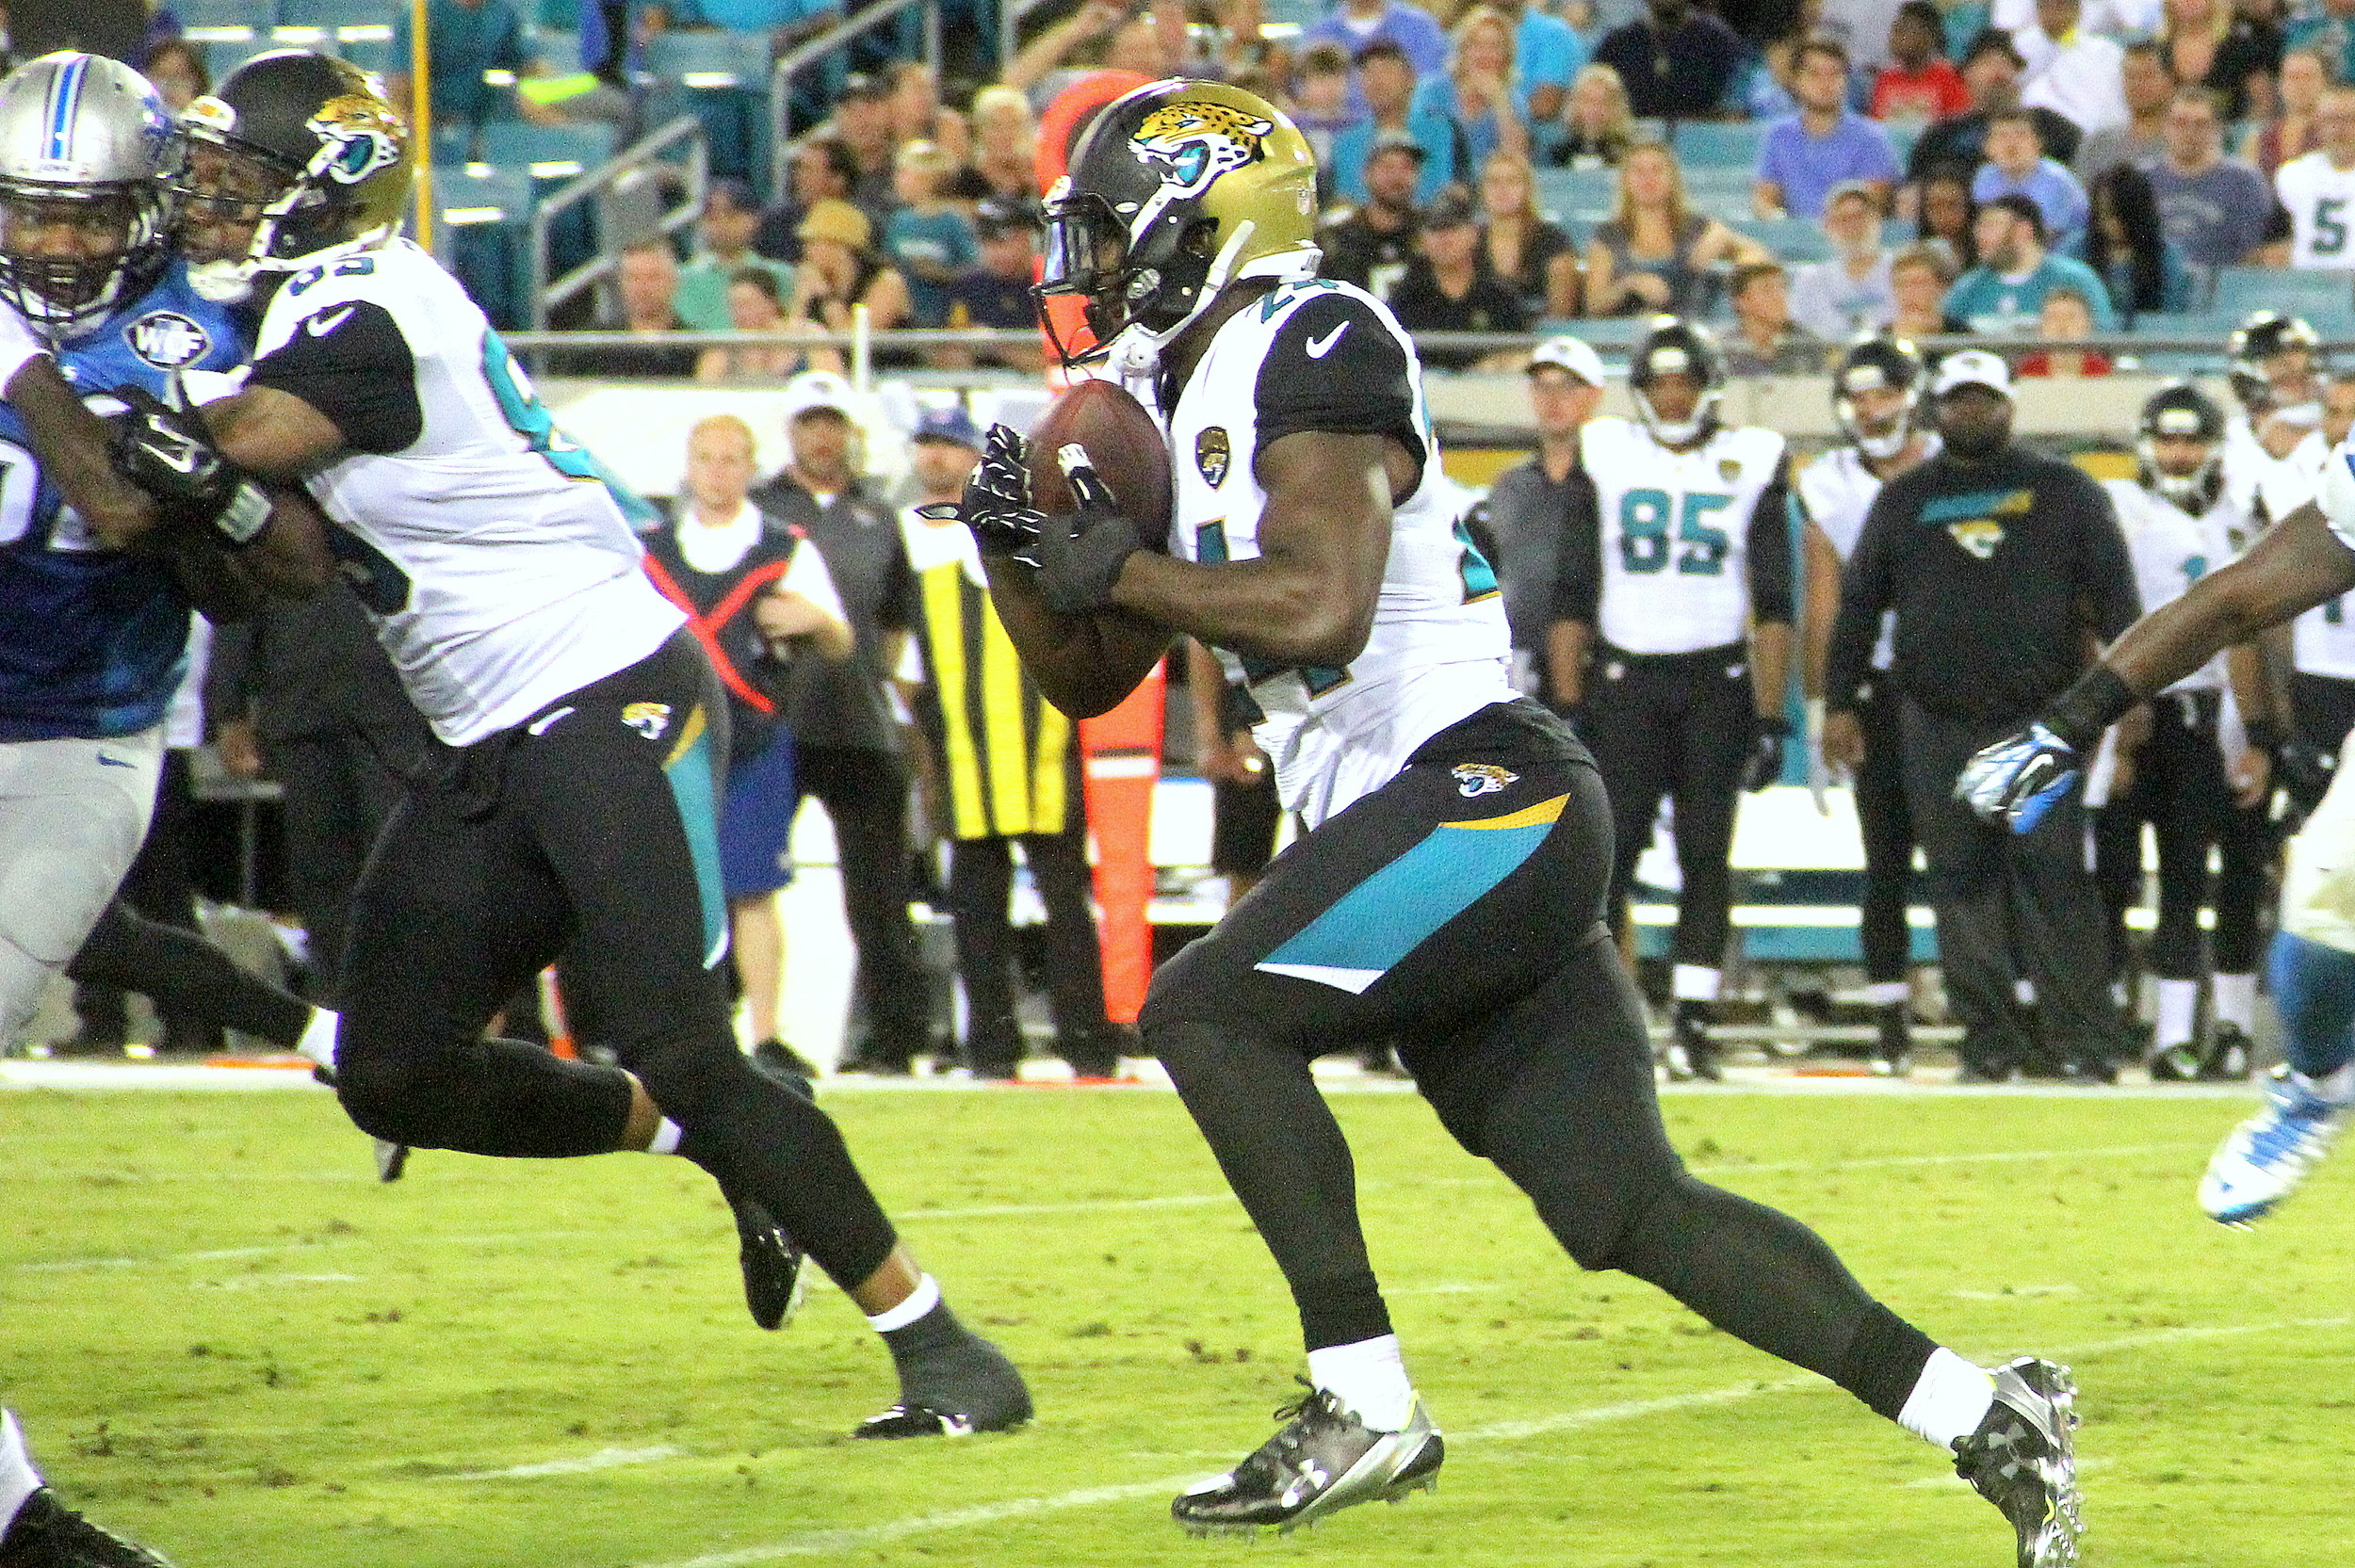 The Jaguars’ first-team offense converted 10 of 12 third downs against the Lions, including the first seven. Rookie running back T.J. Yeldon, out of Alabama, had a one-yard rushing TD in his NFL debut.